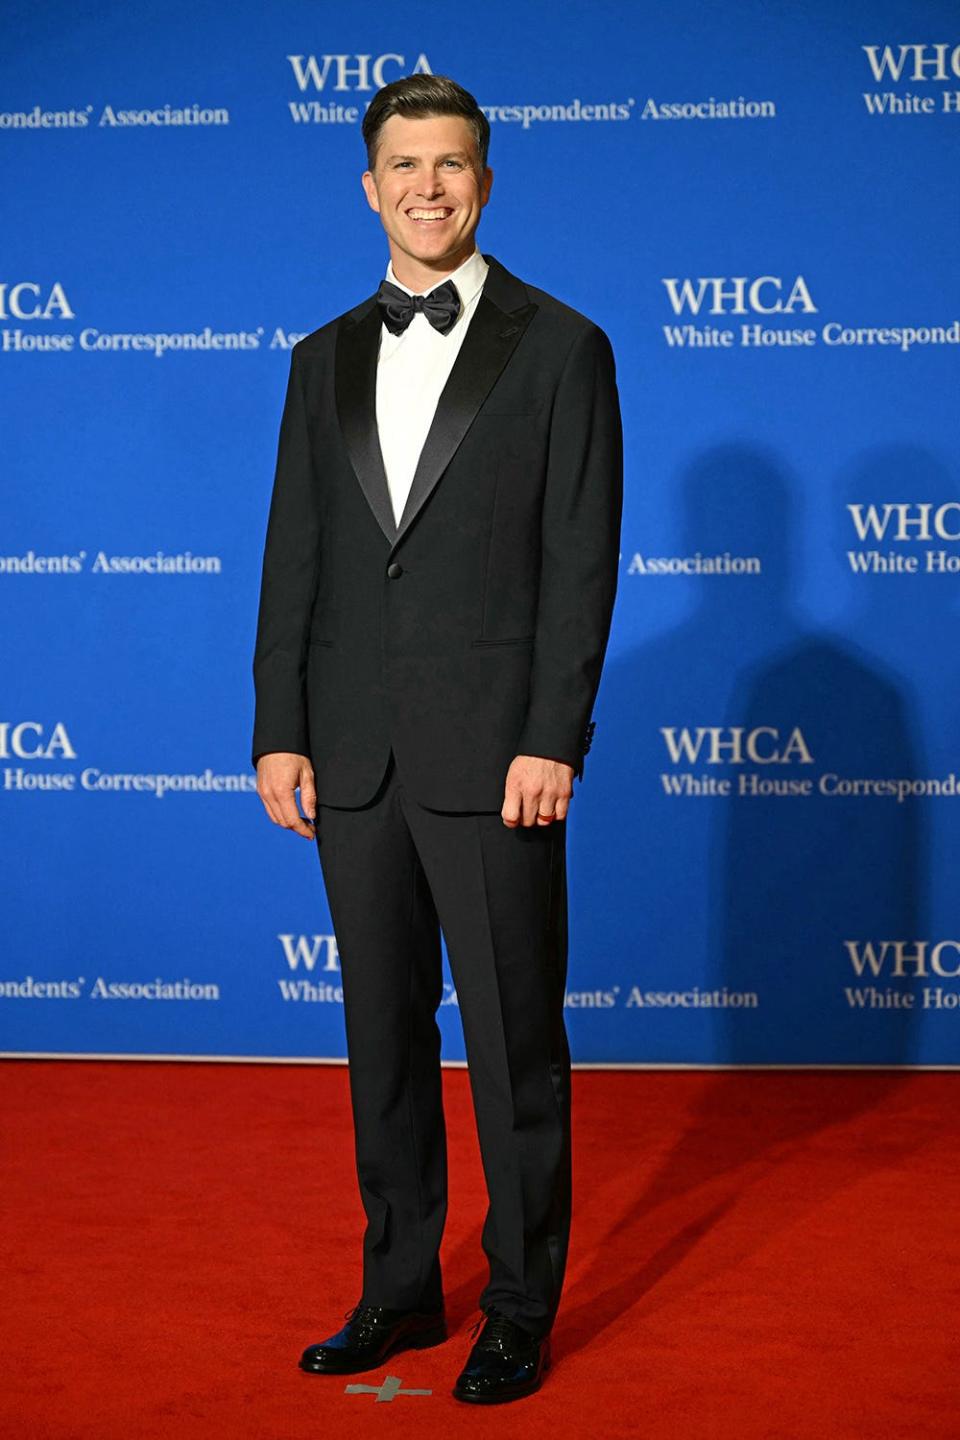 Colin Jost at the White House Correspondents Dinner on April 27.